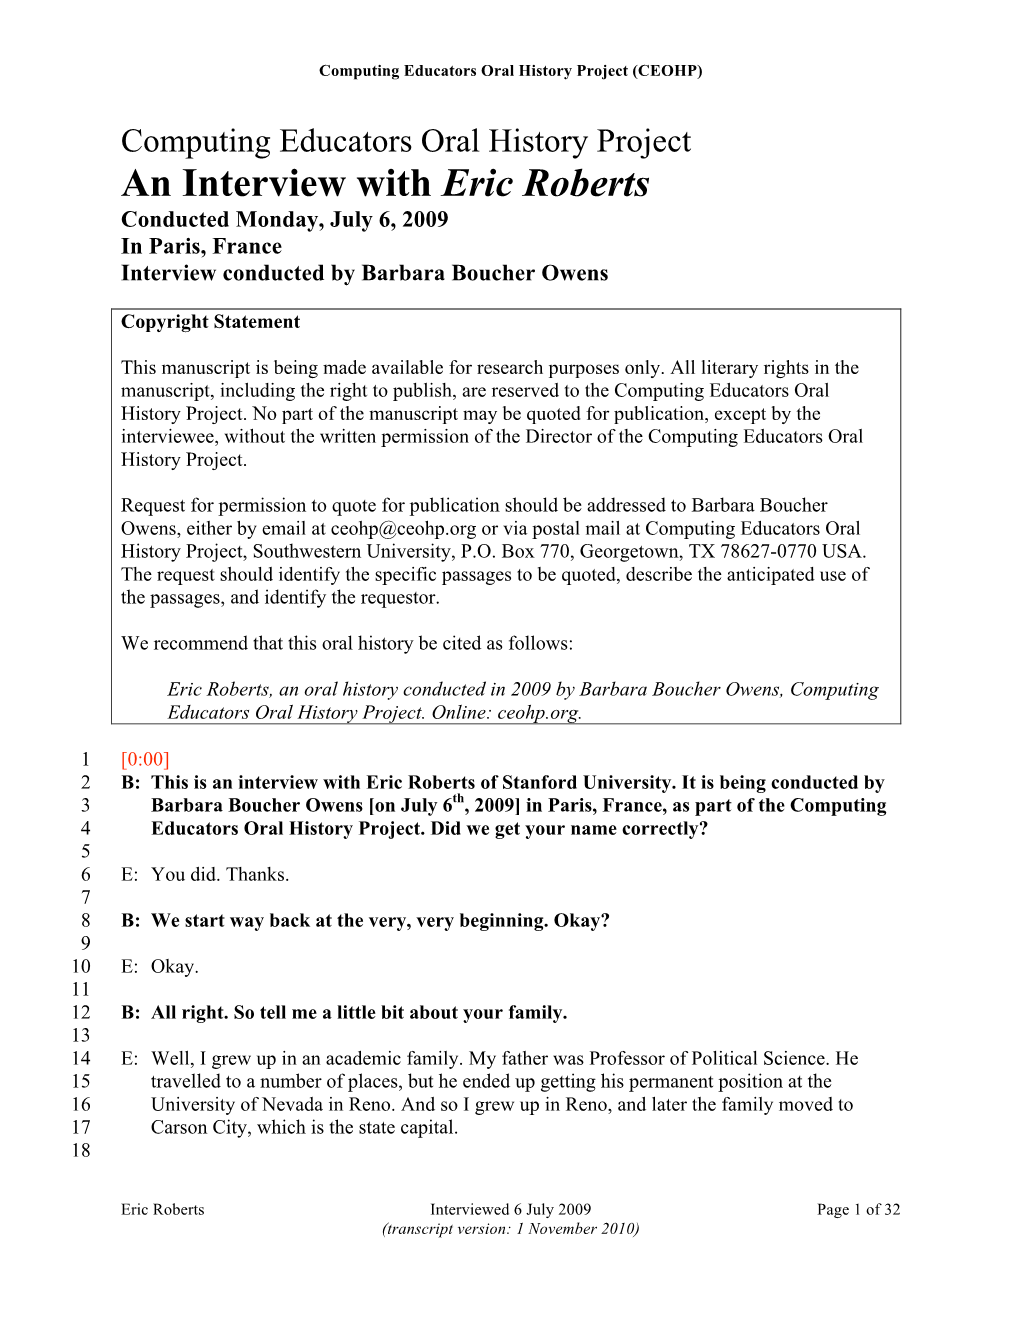 An Interview with Eric Roberts Conducted Monday, July 6, 2009 in Paris, France Interview Conducted by Barbara Boucher Owens